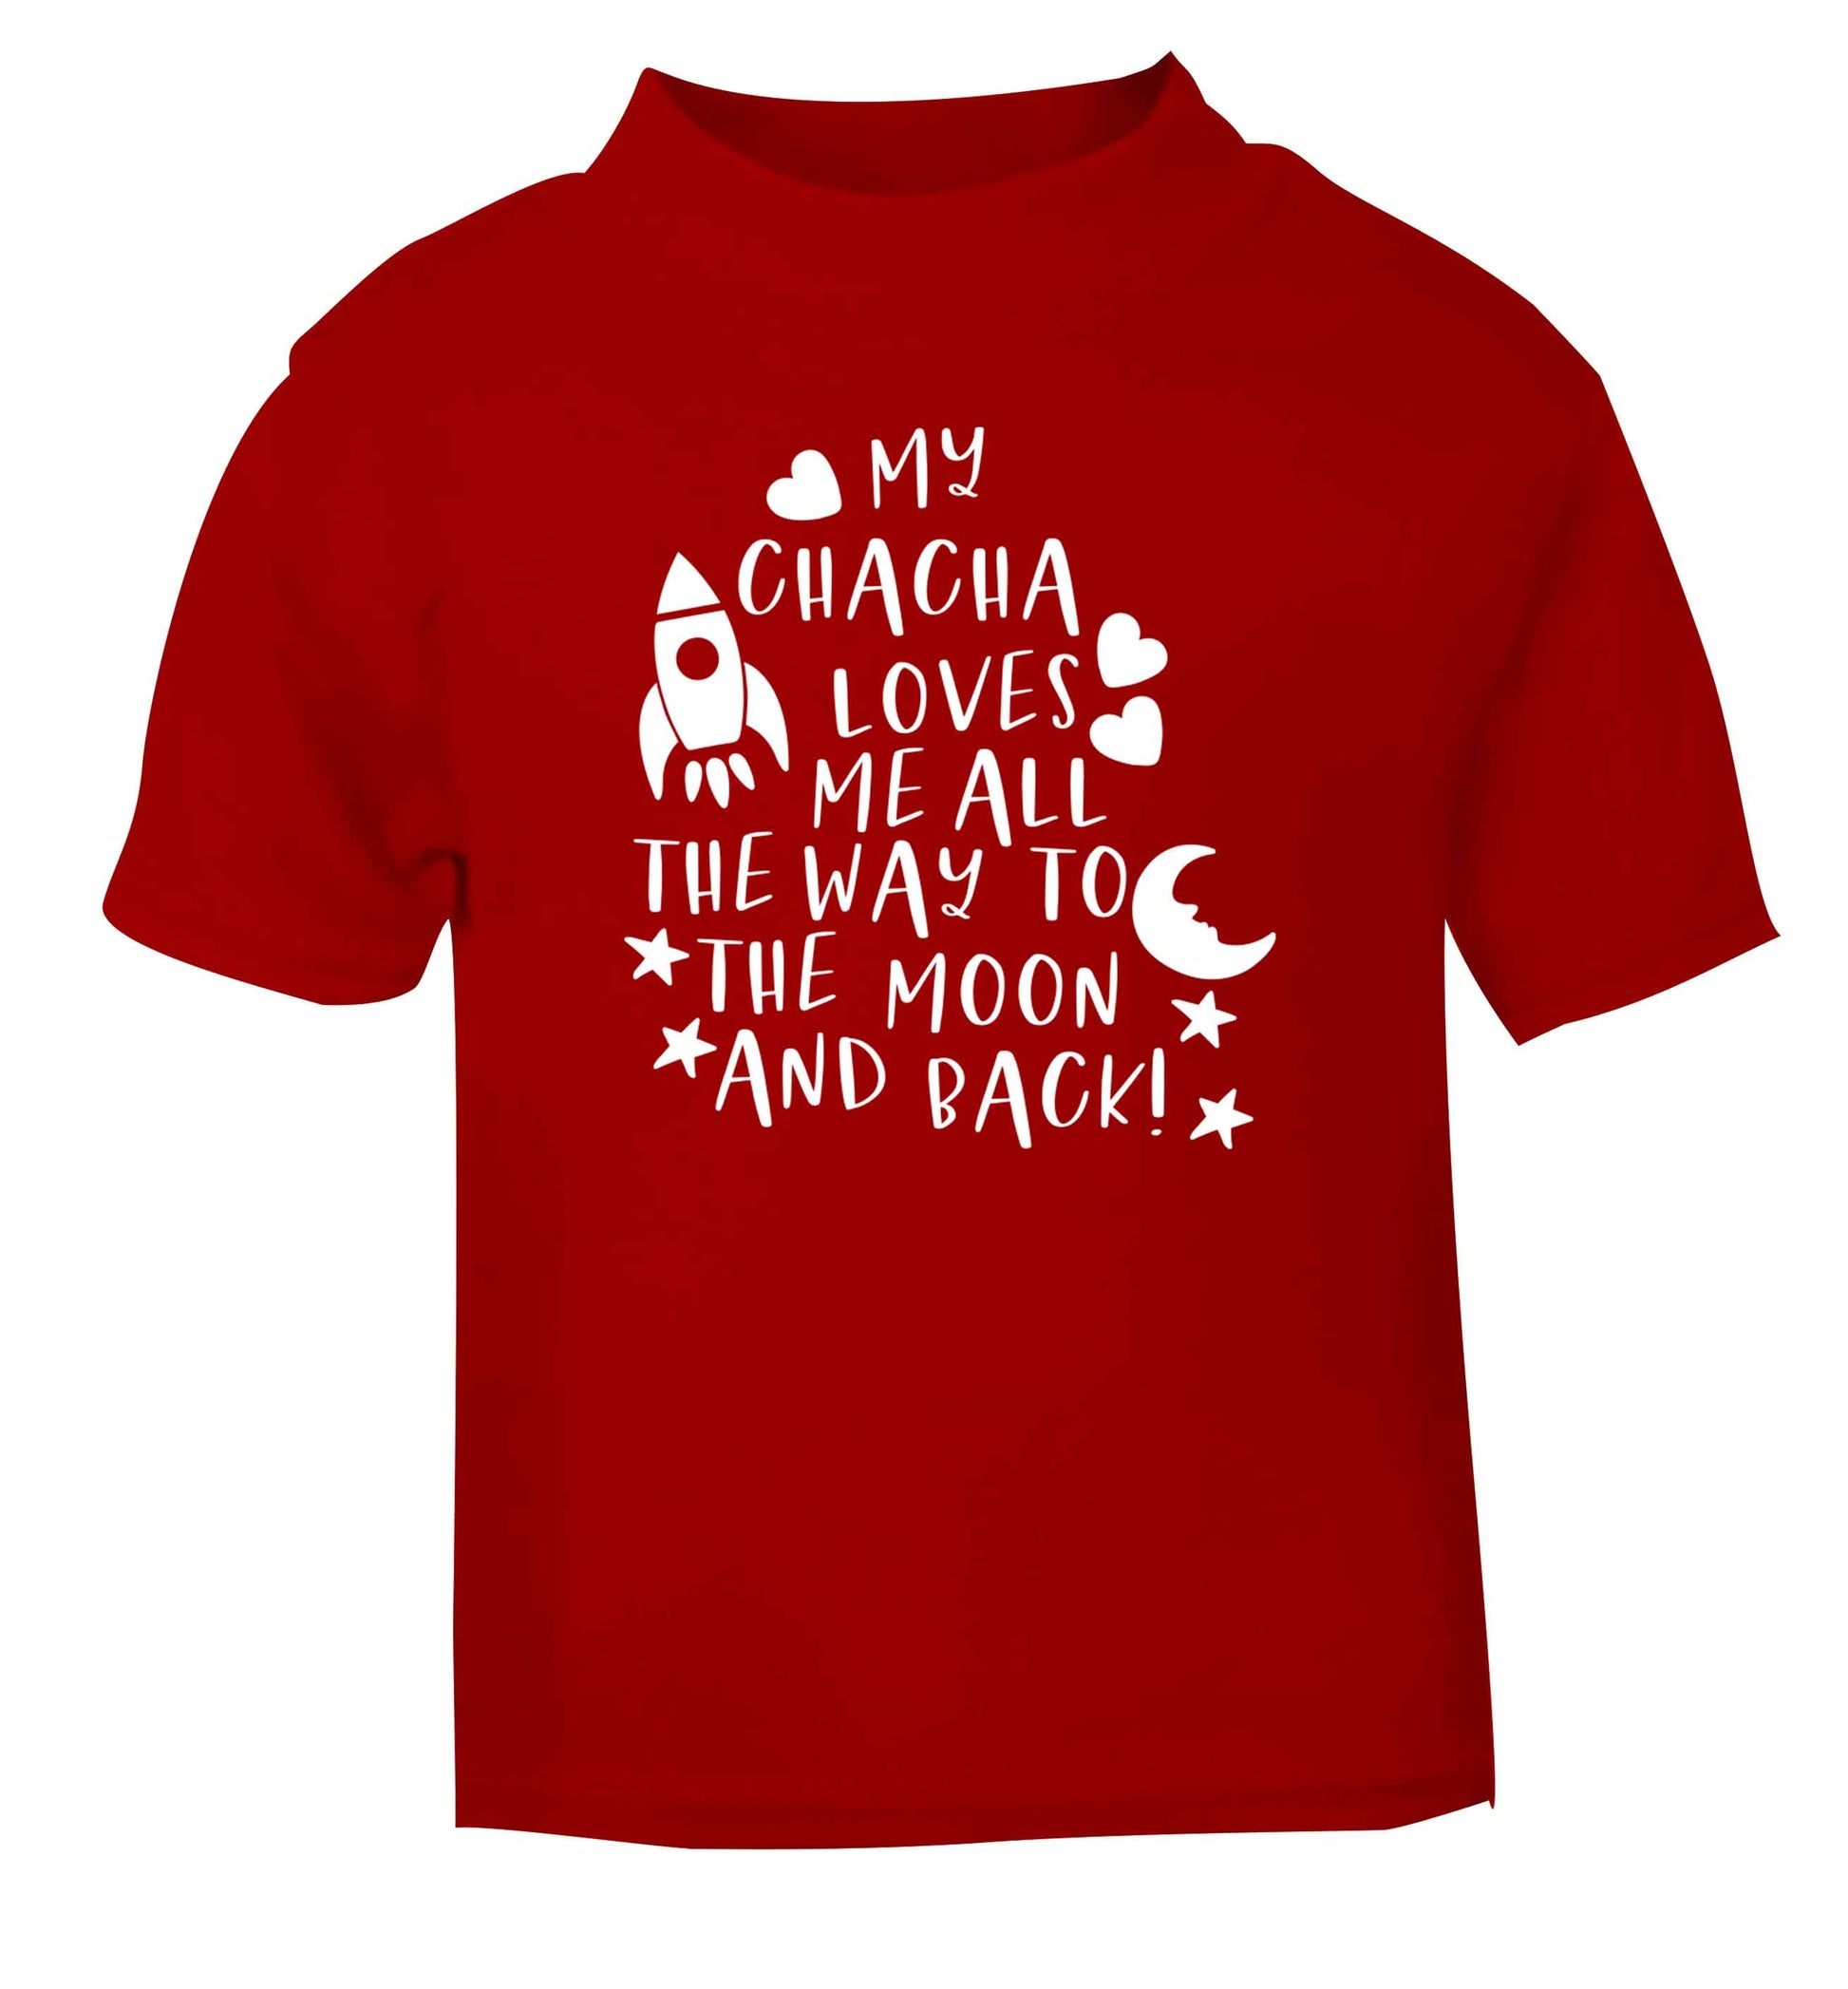 My chacha loves me all the way to the moon and back red Baby Toddler Tshirt 2 Years